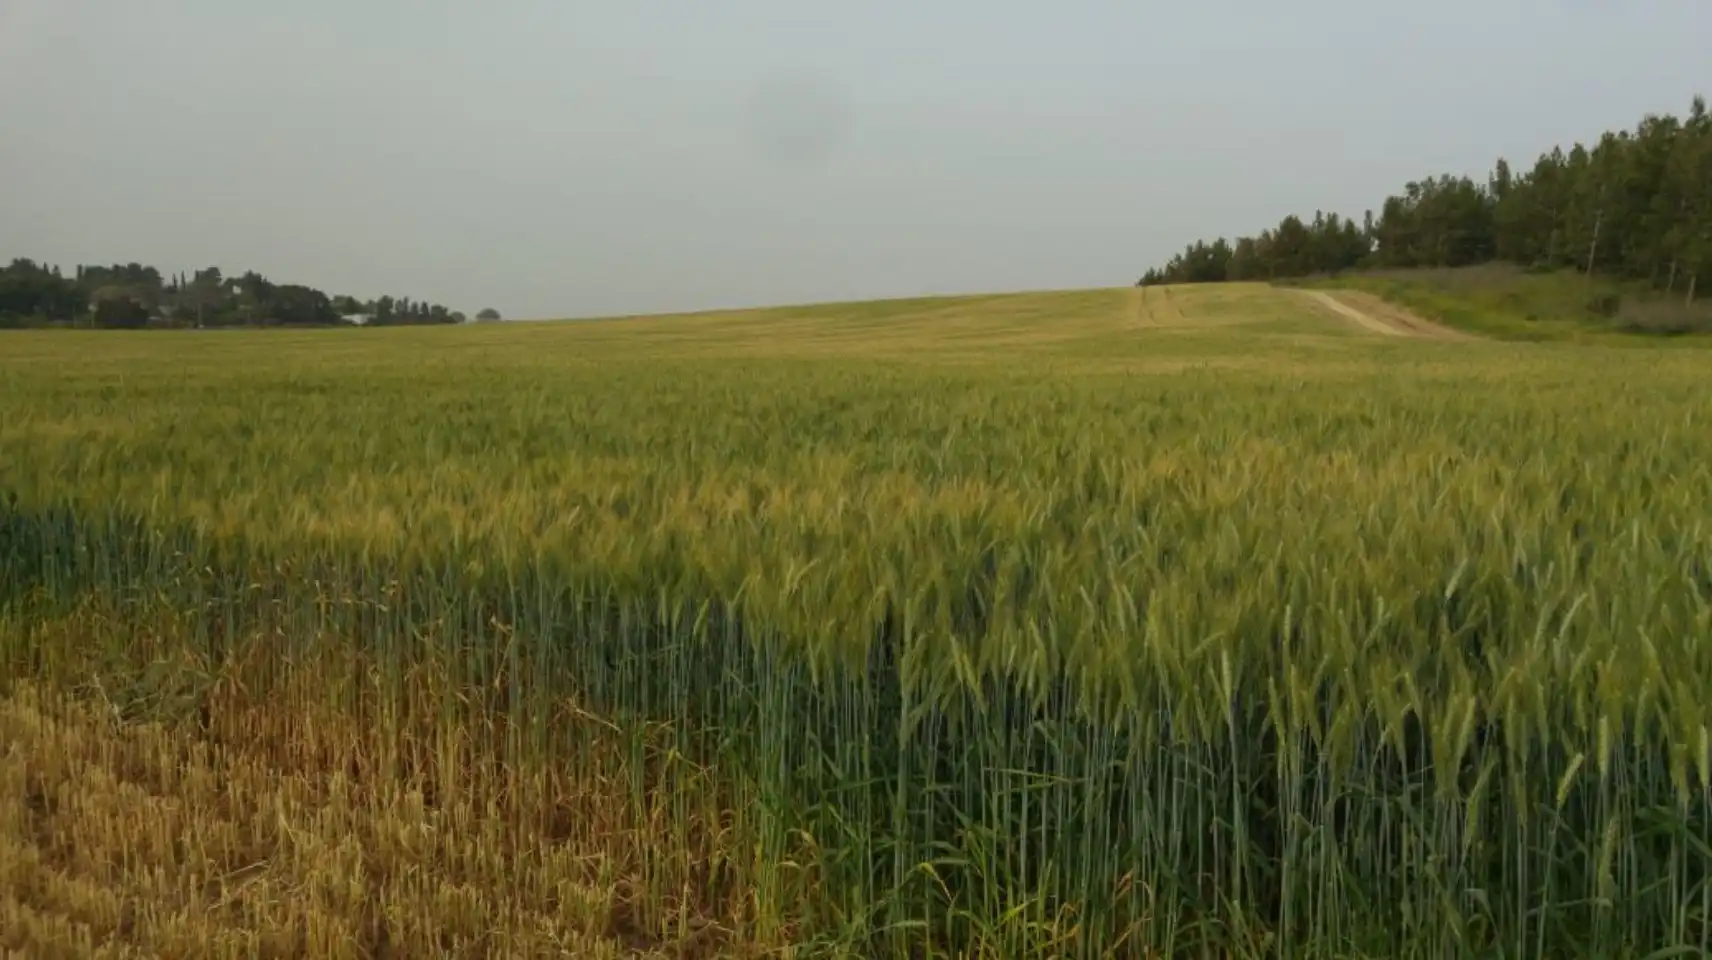 Image: Agriculture relies on community performance. Researchers from IPK Leibniz Institute have investigated how the behavior of an individual wheat plant under limiting light conditions influences the performance of the whole community. Credit: IPK Leibniz Institute/ T. Schnurbusch